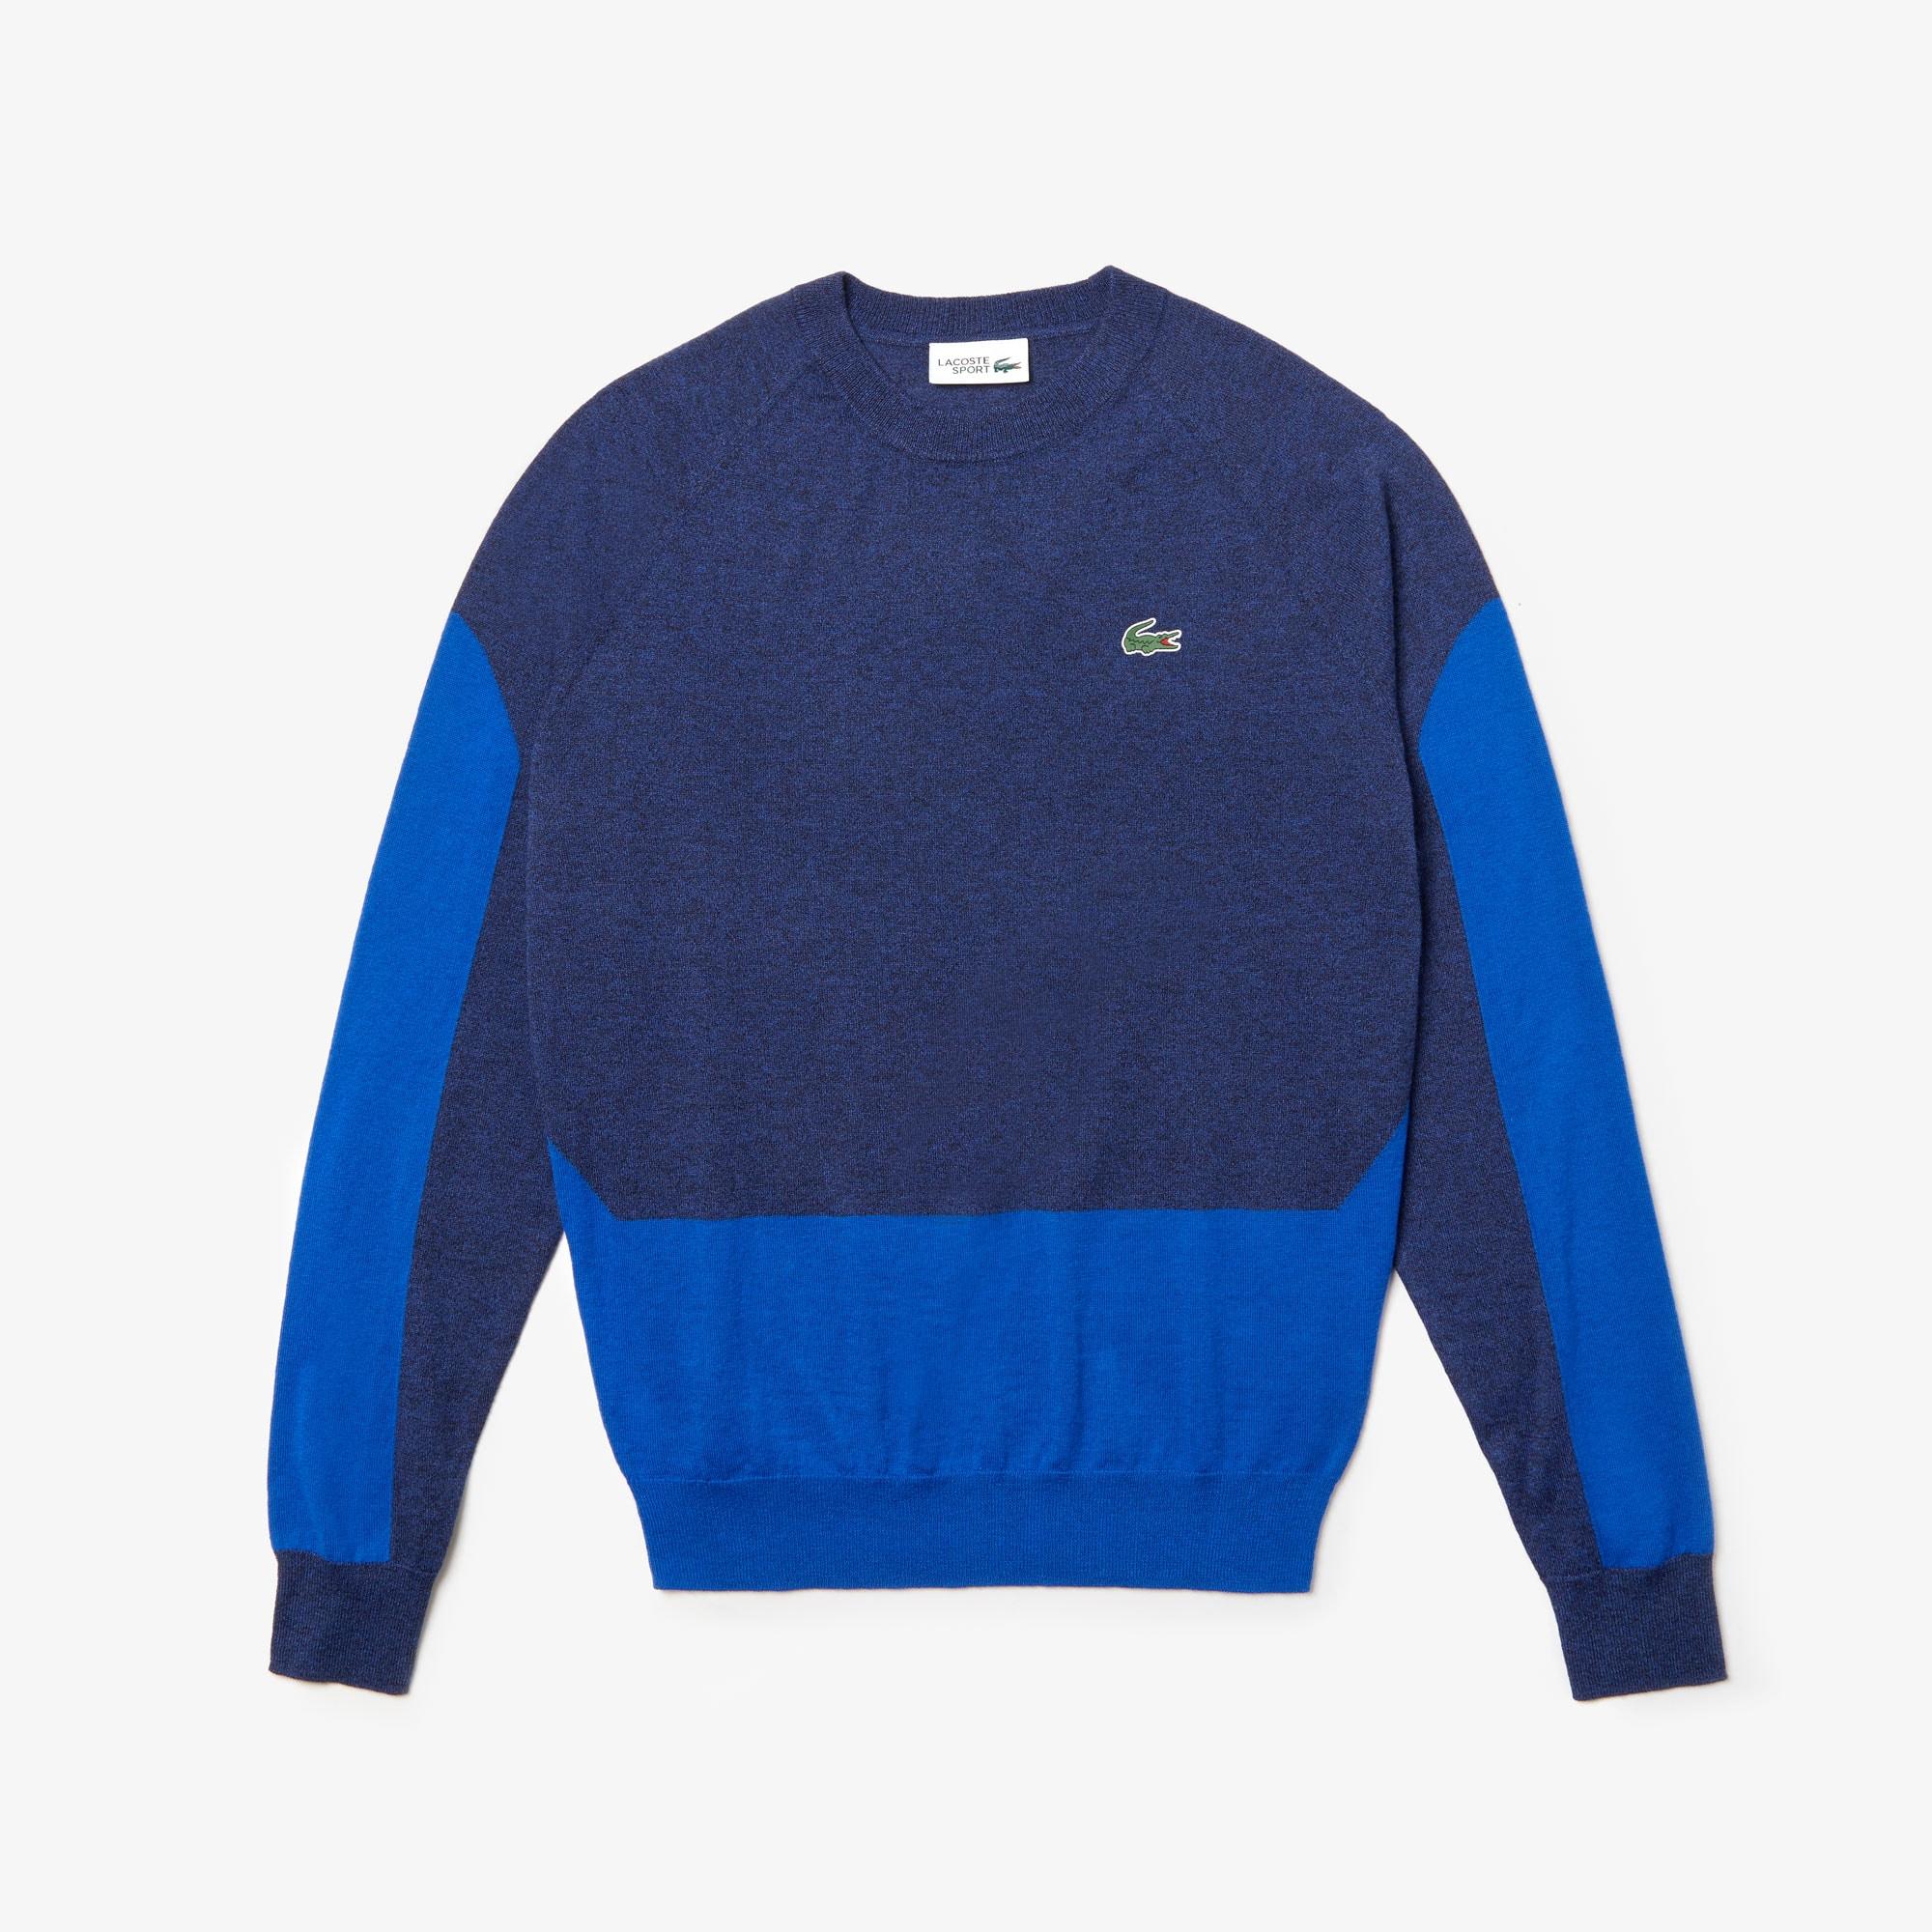 Lacoste Sport Color-blocked Breathable Wool Sweater in Blue for Men - Lyst